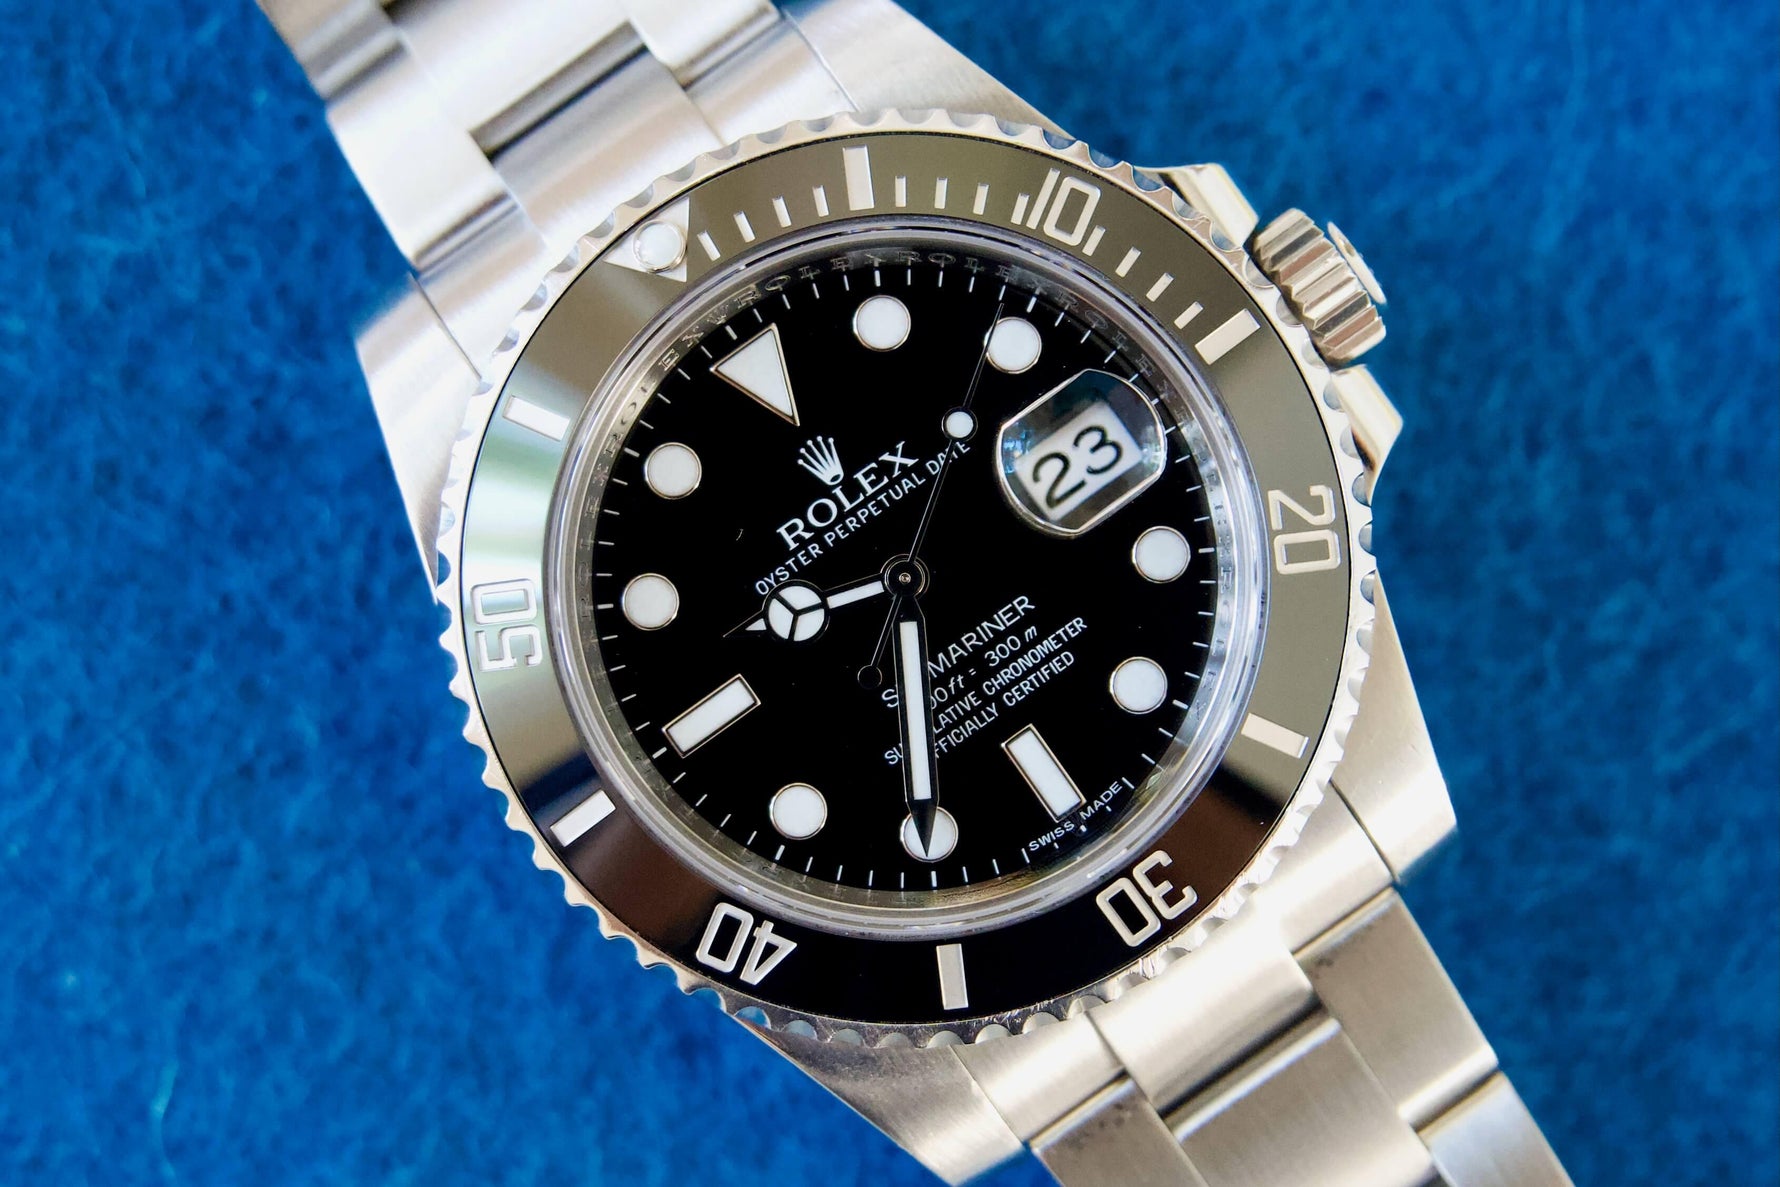 SOLD OUT: Rolex Submariner Date CERAMIC 116610 Box and Papers 40mm - WearingTime Luxury Watches